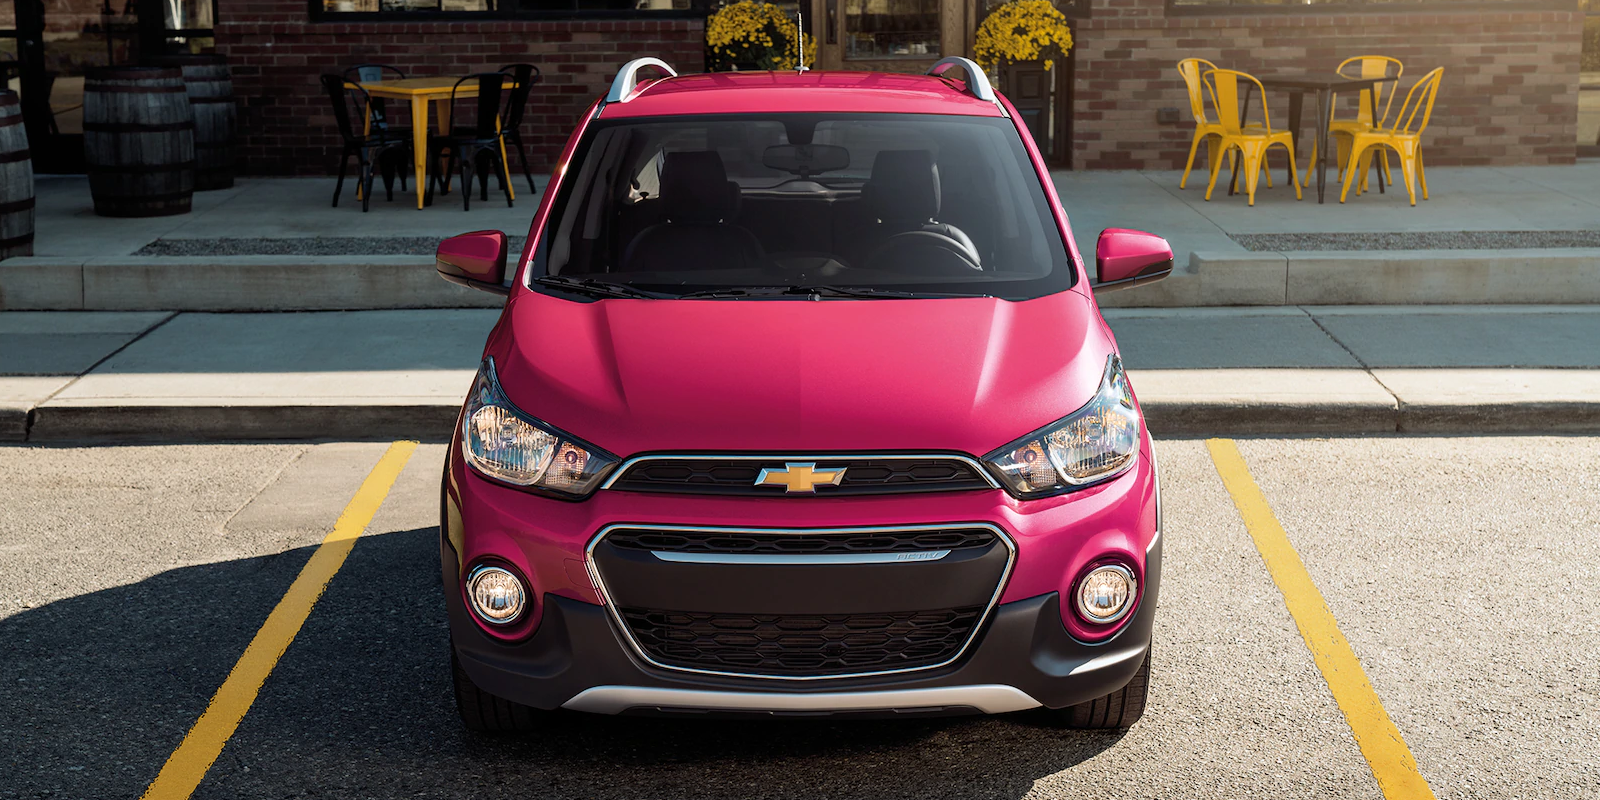 2019 Chevrolet Spark Raspberry Exterior Front Picture.png